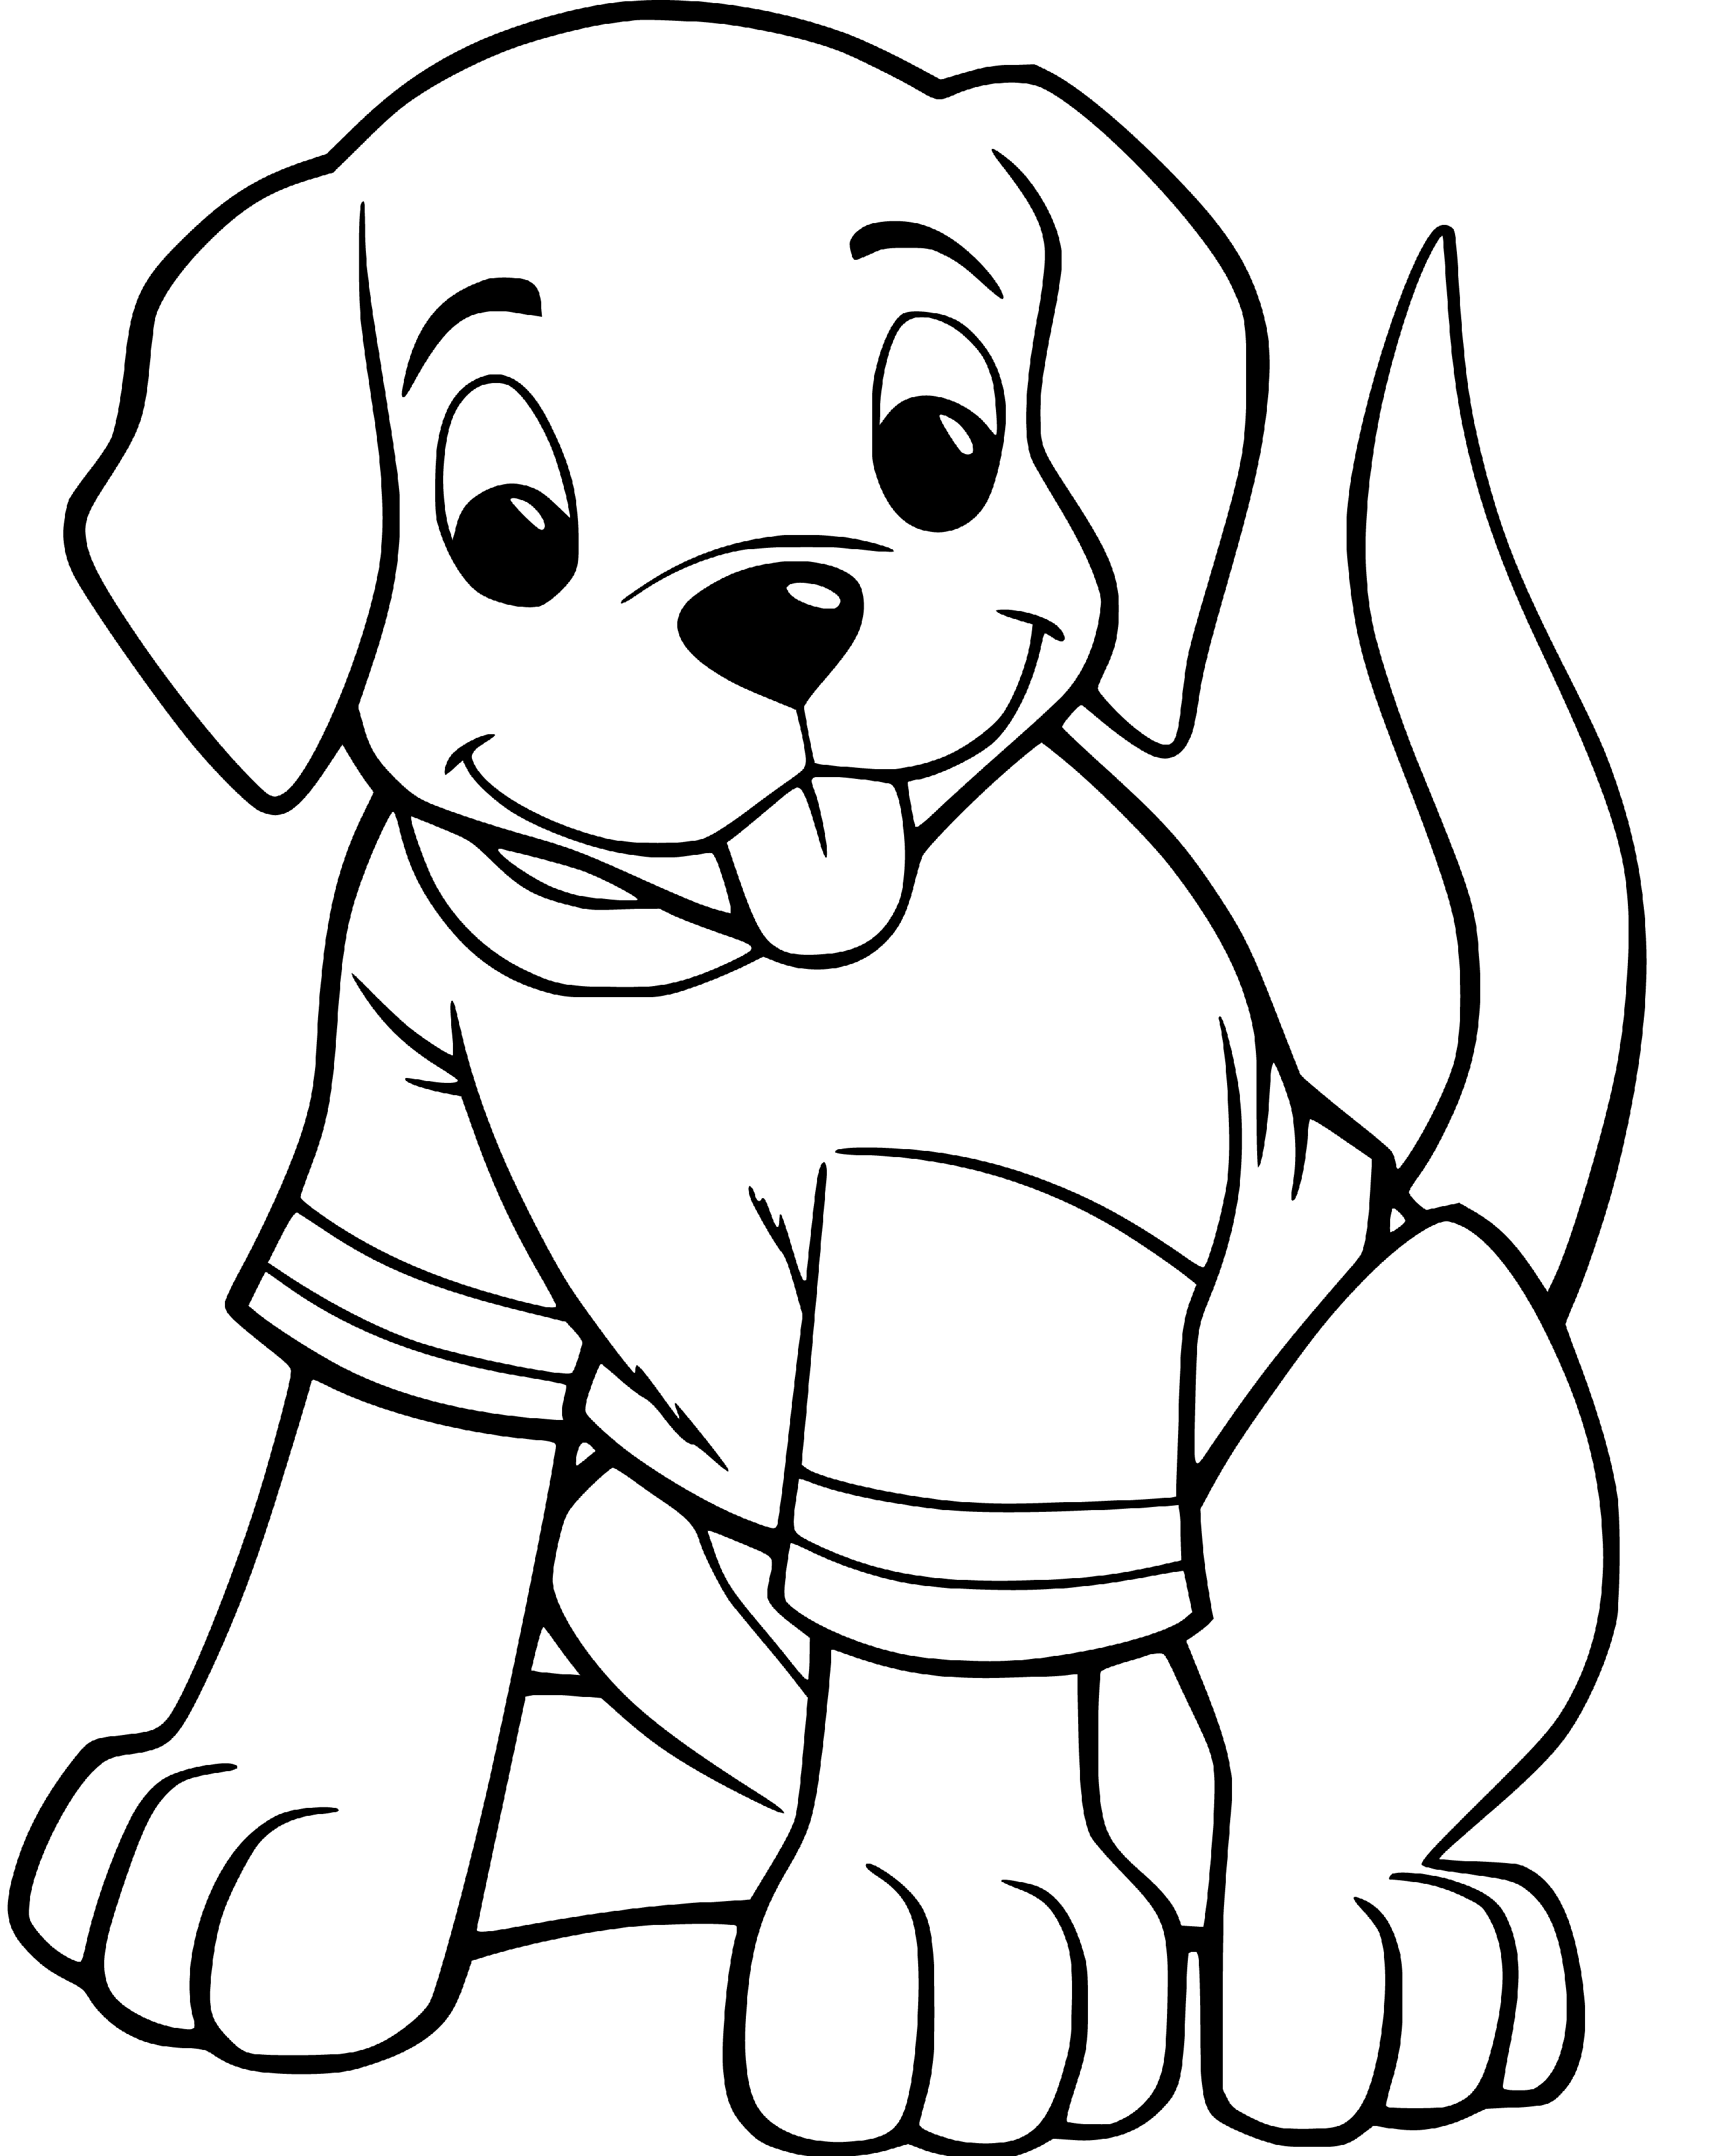 Printable Happy Puppy Coloring Page for kids.